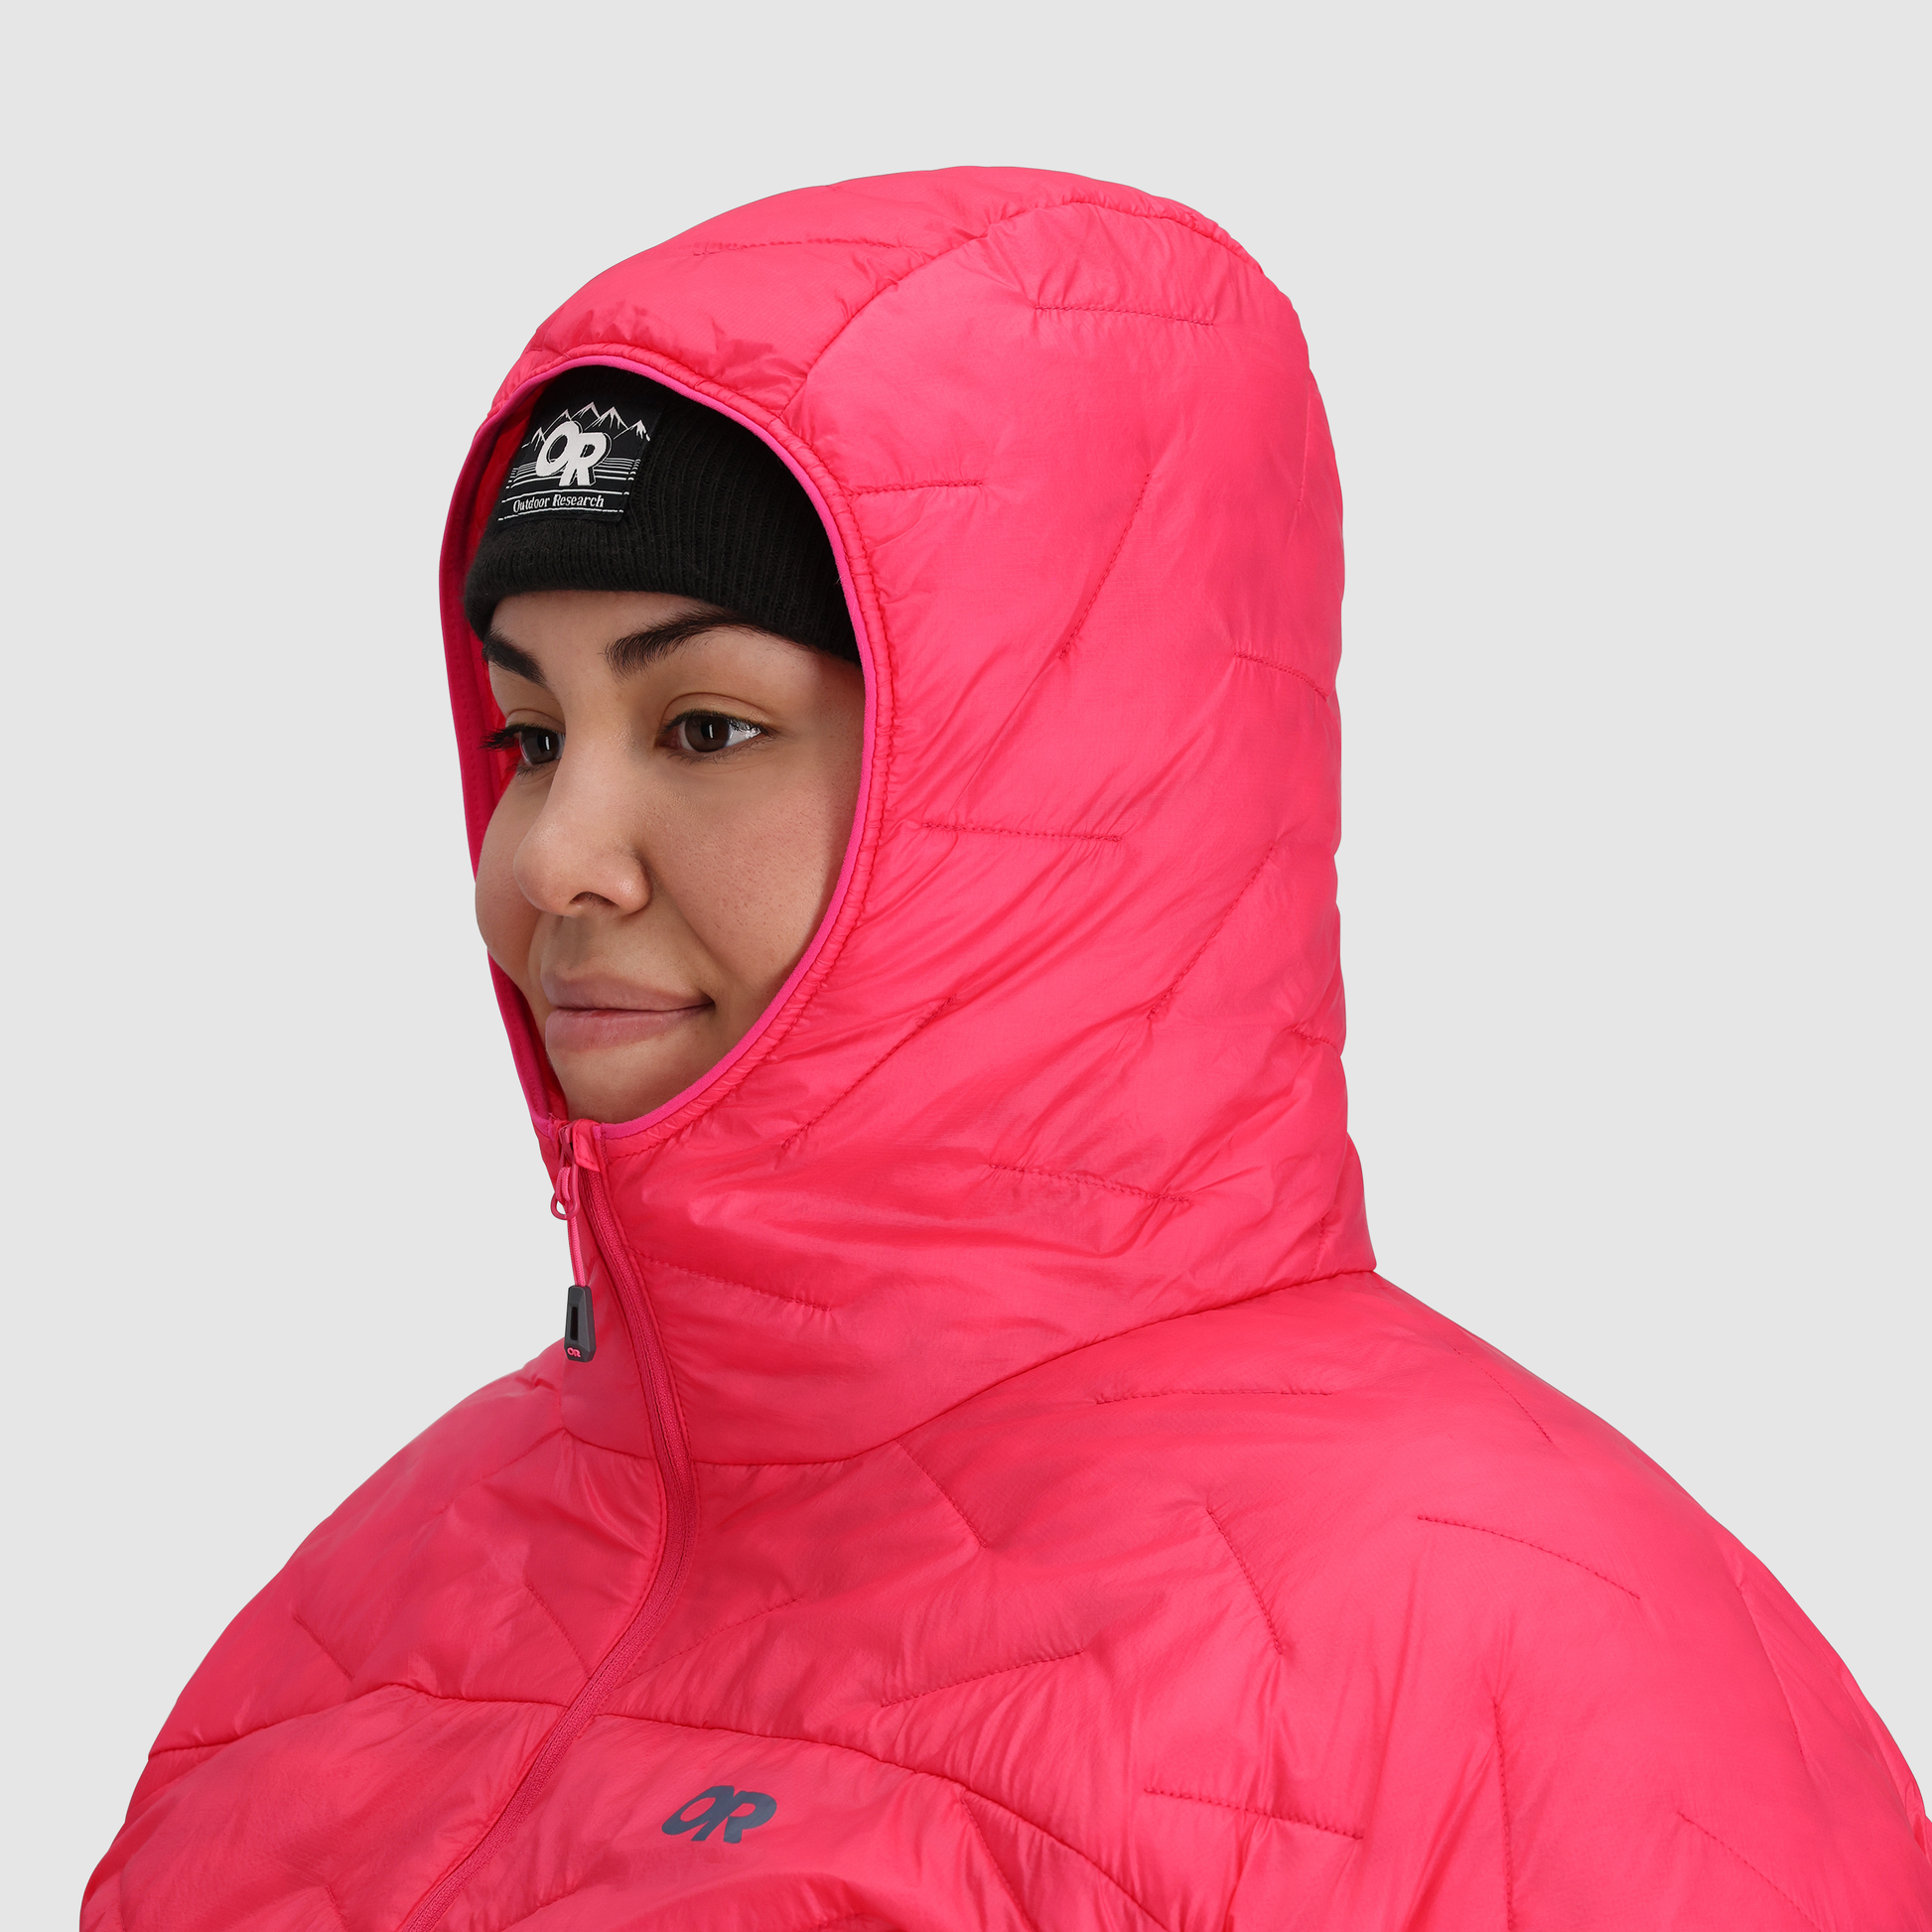 B2 :: Hood / Hold in warmth and keep out weather with this essential hood.